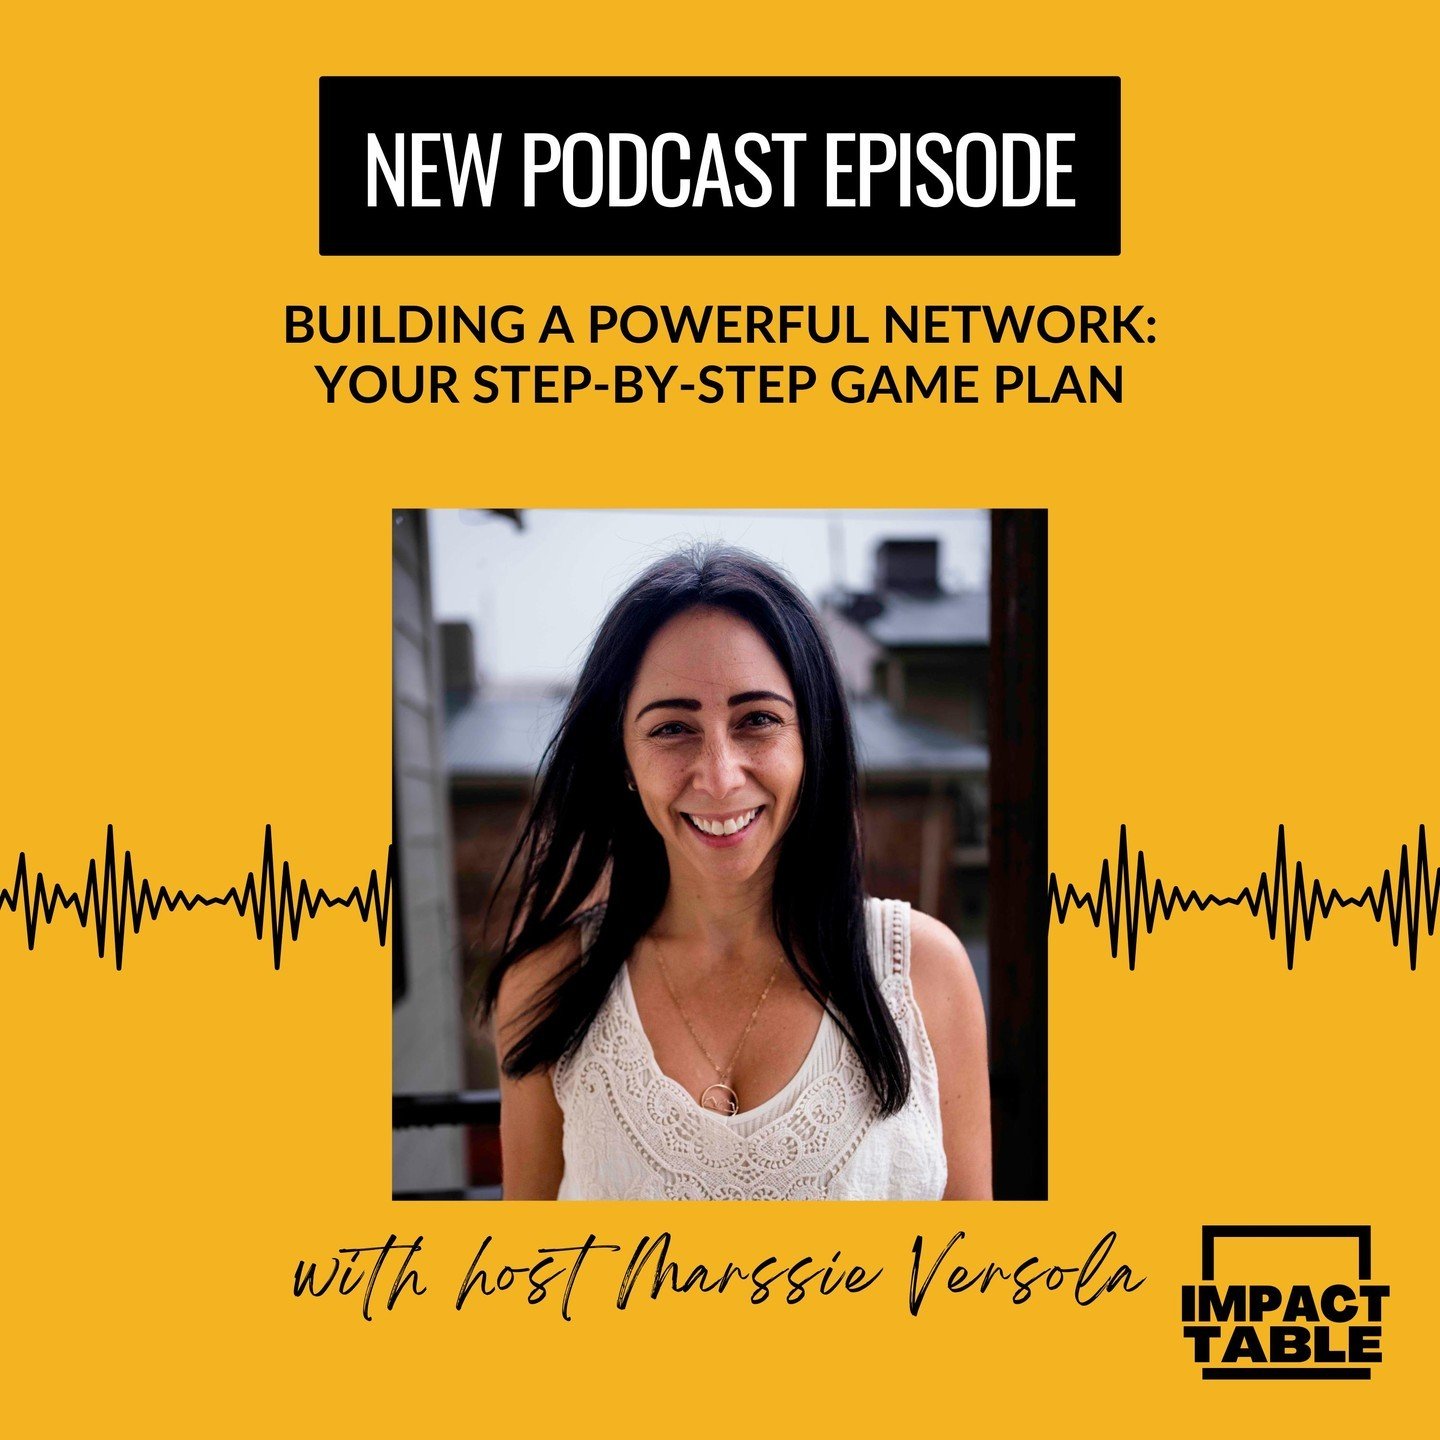 In this week&rsquo;s episode of the Impact Table podcast, podcast host and Impact Table Creator, Marssie Versola, is talking about something essential, that often falls to the bottom of the priority list or perhaps doesn&rsquo;t make the list at all: